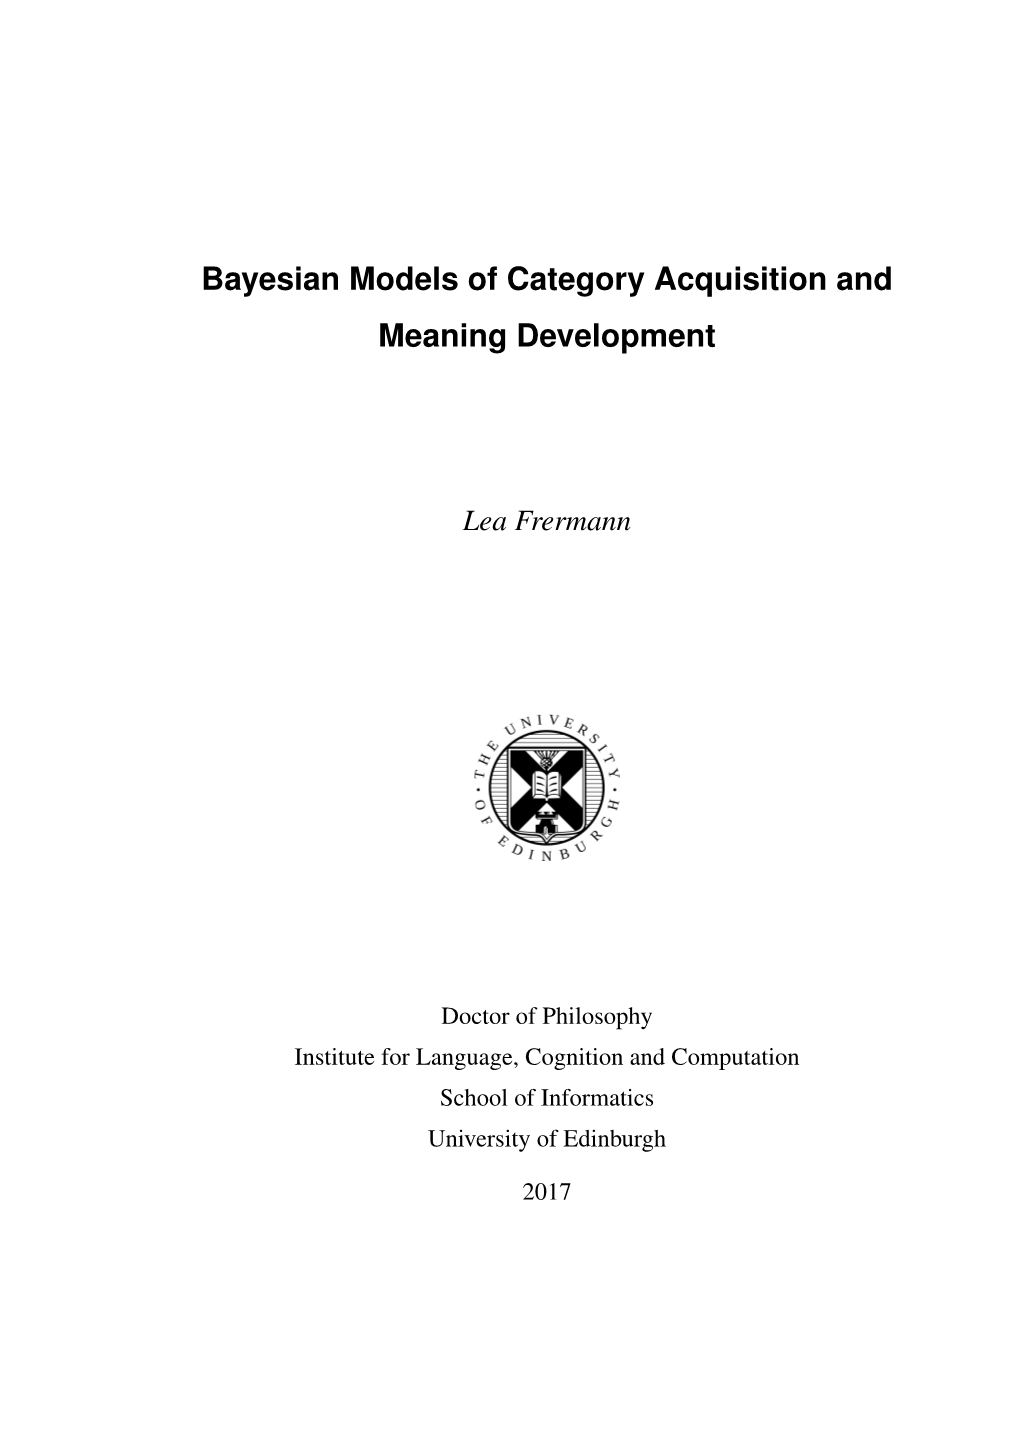 Bayesian Models of Category Acquisition and Meaning Development